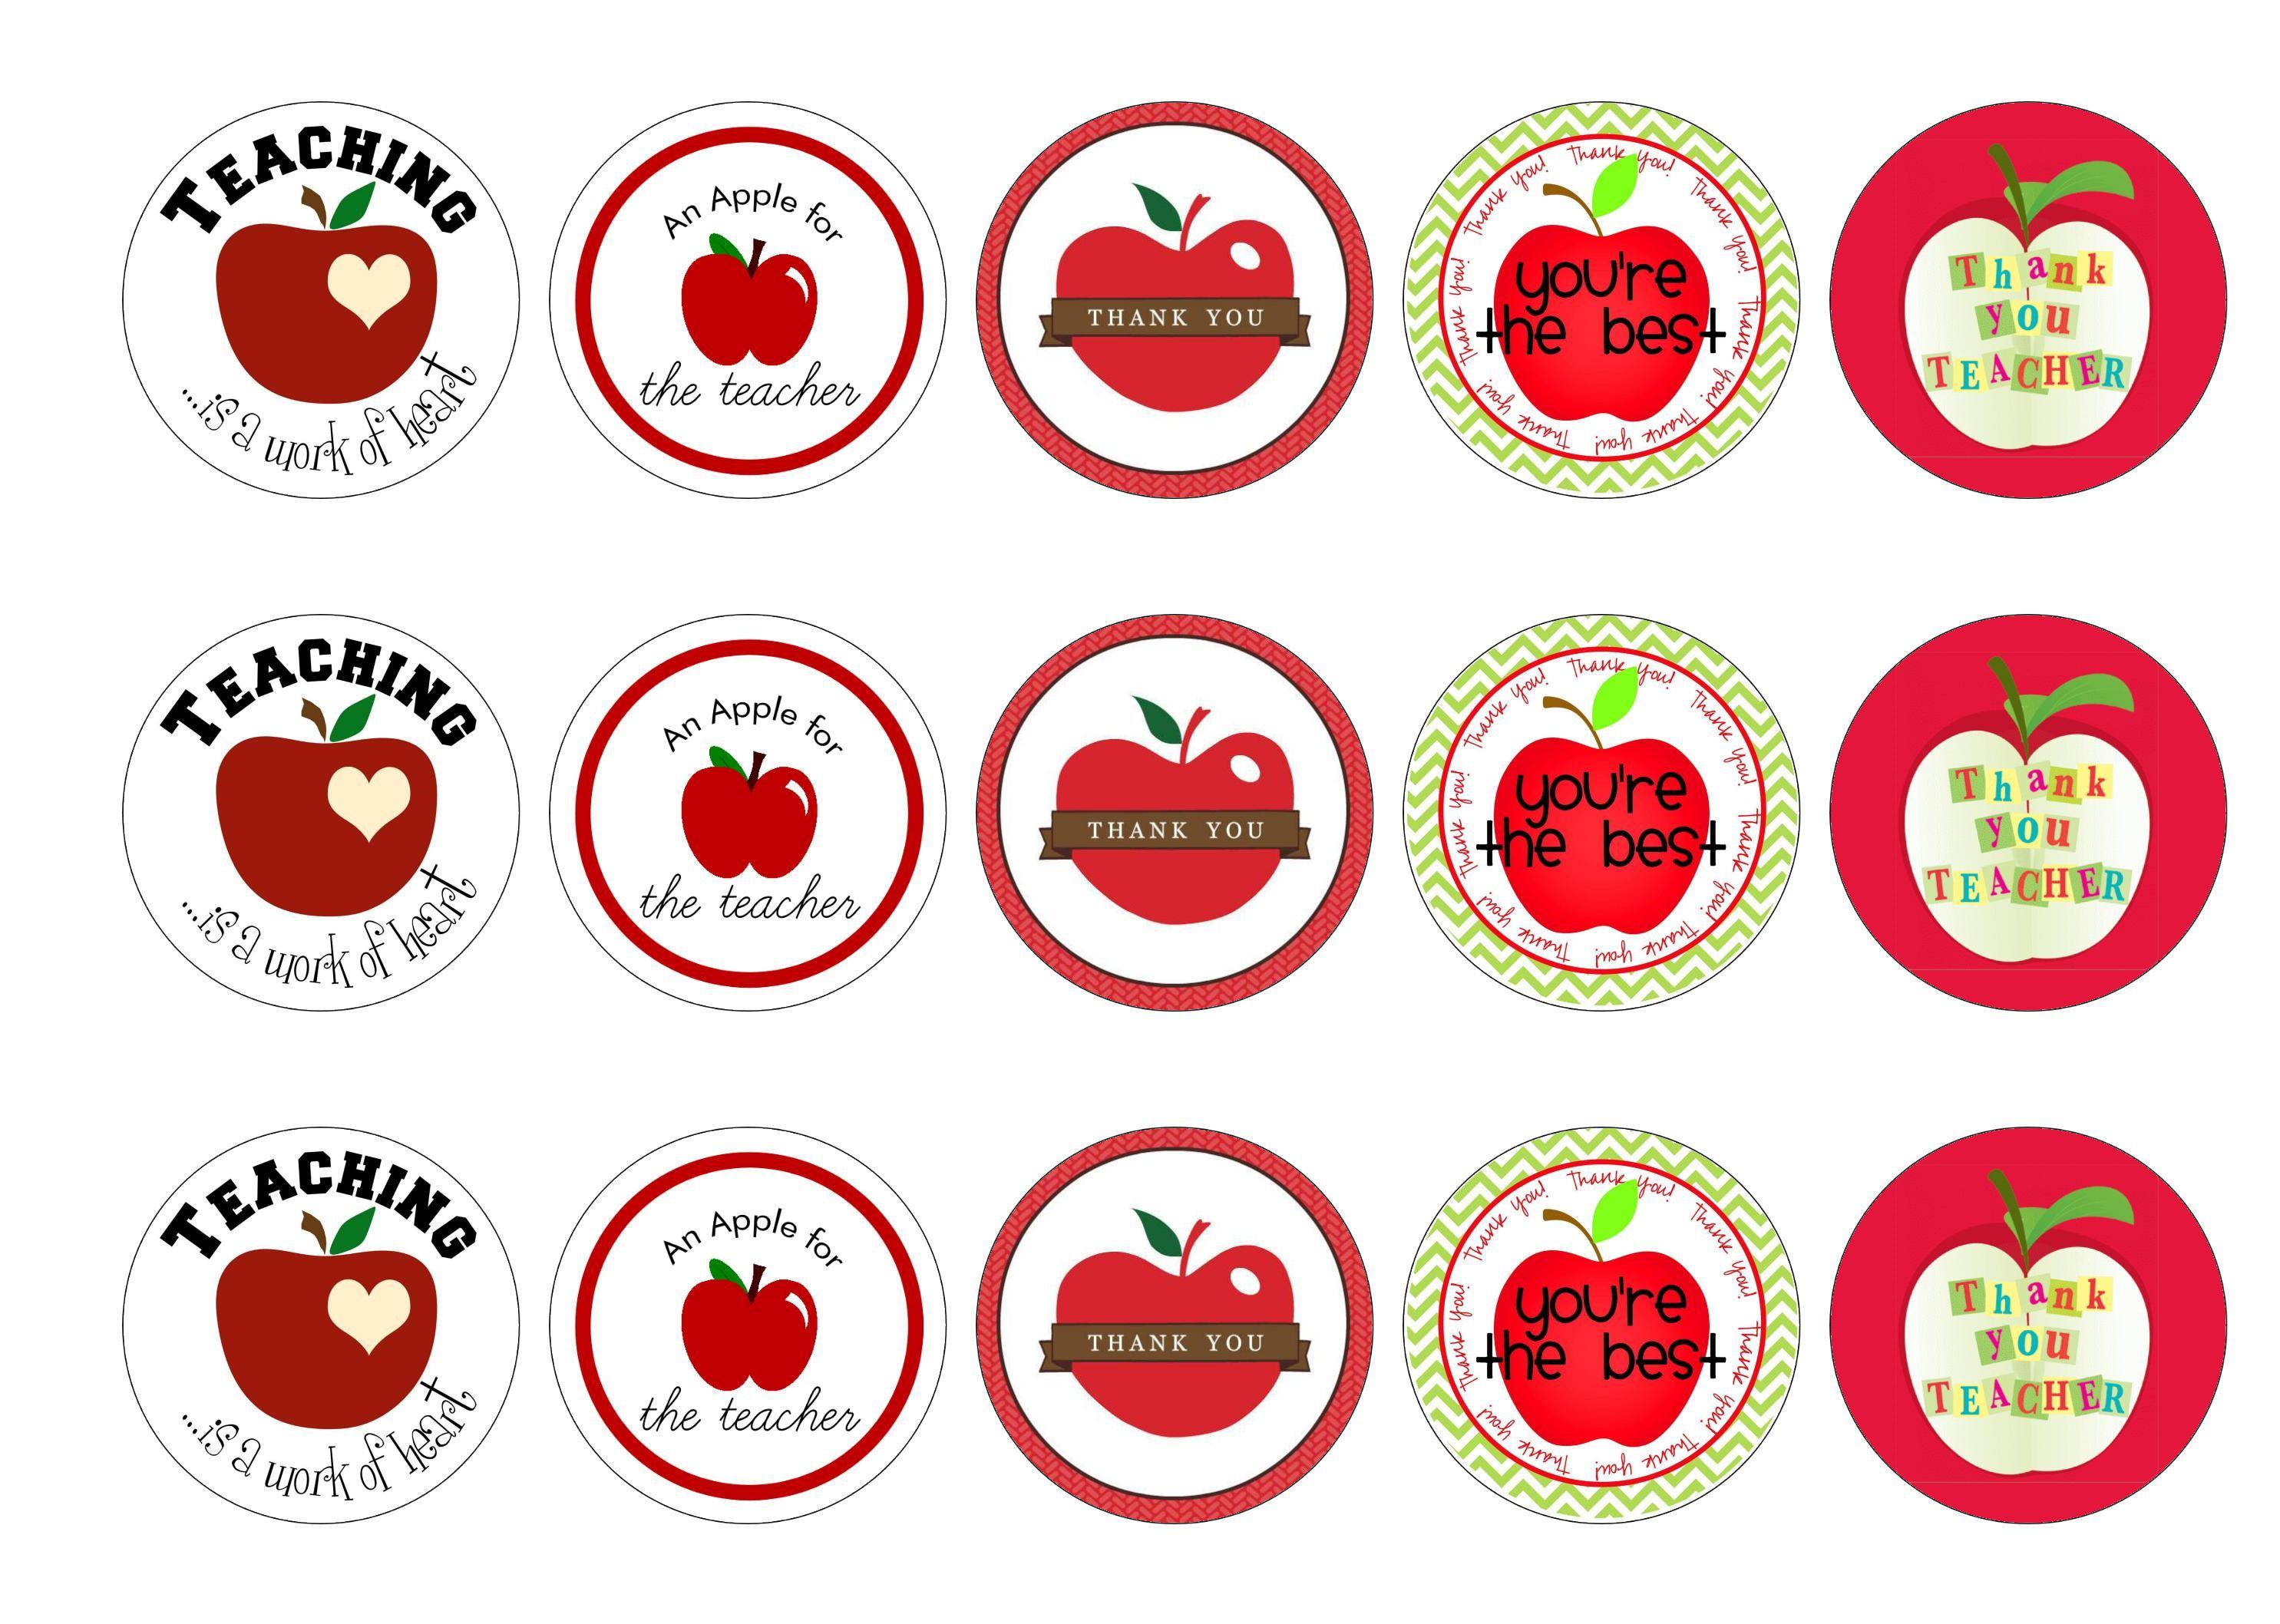 15 printed cupcake toppers with images of apples for teachers